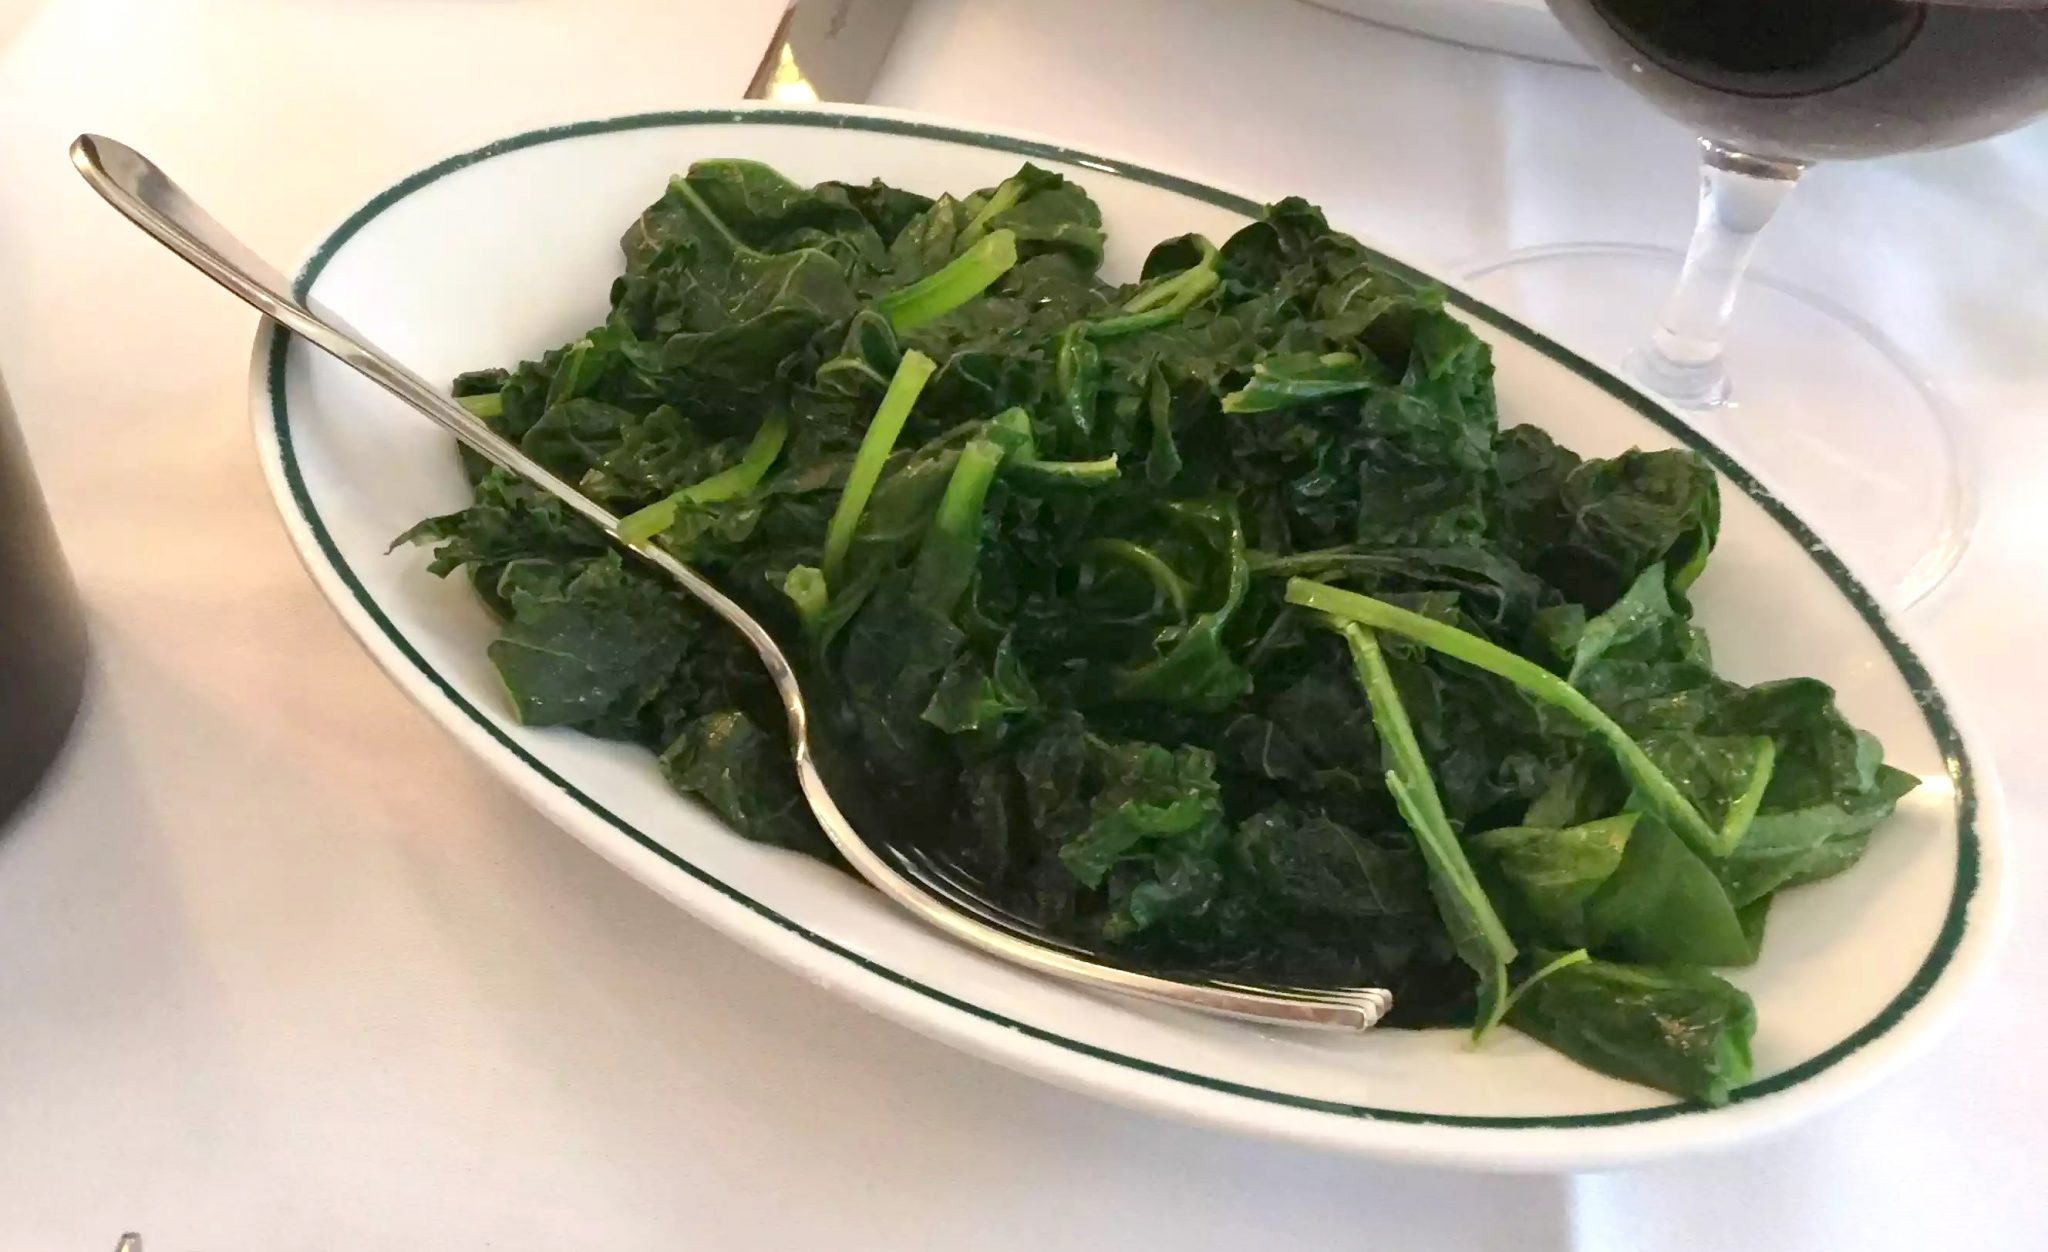 Ivy Cafe Restaurant Review Marylebone London Lunch Spinach Kale